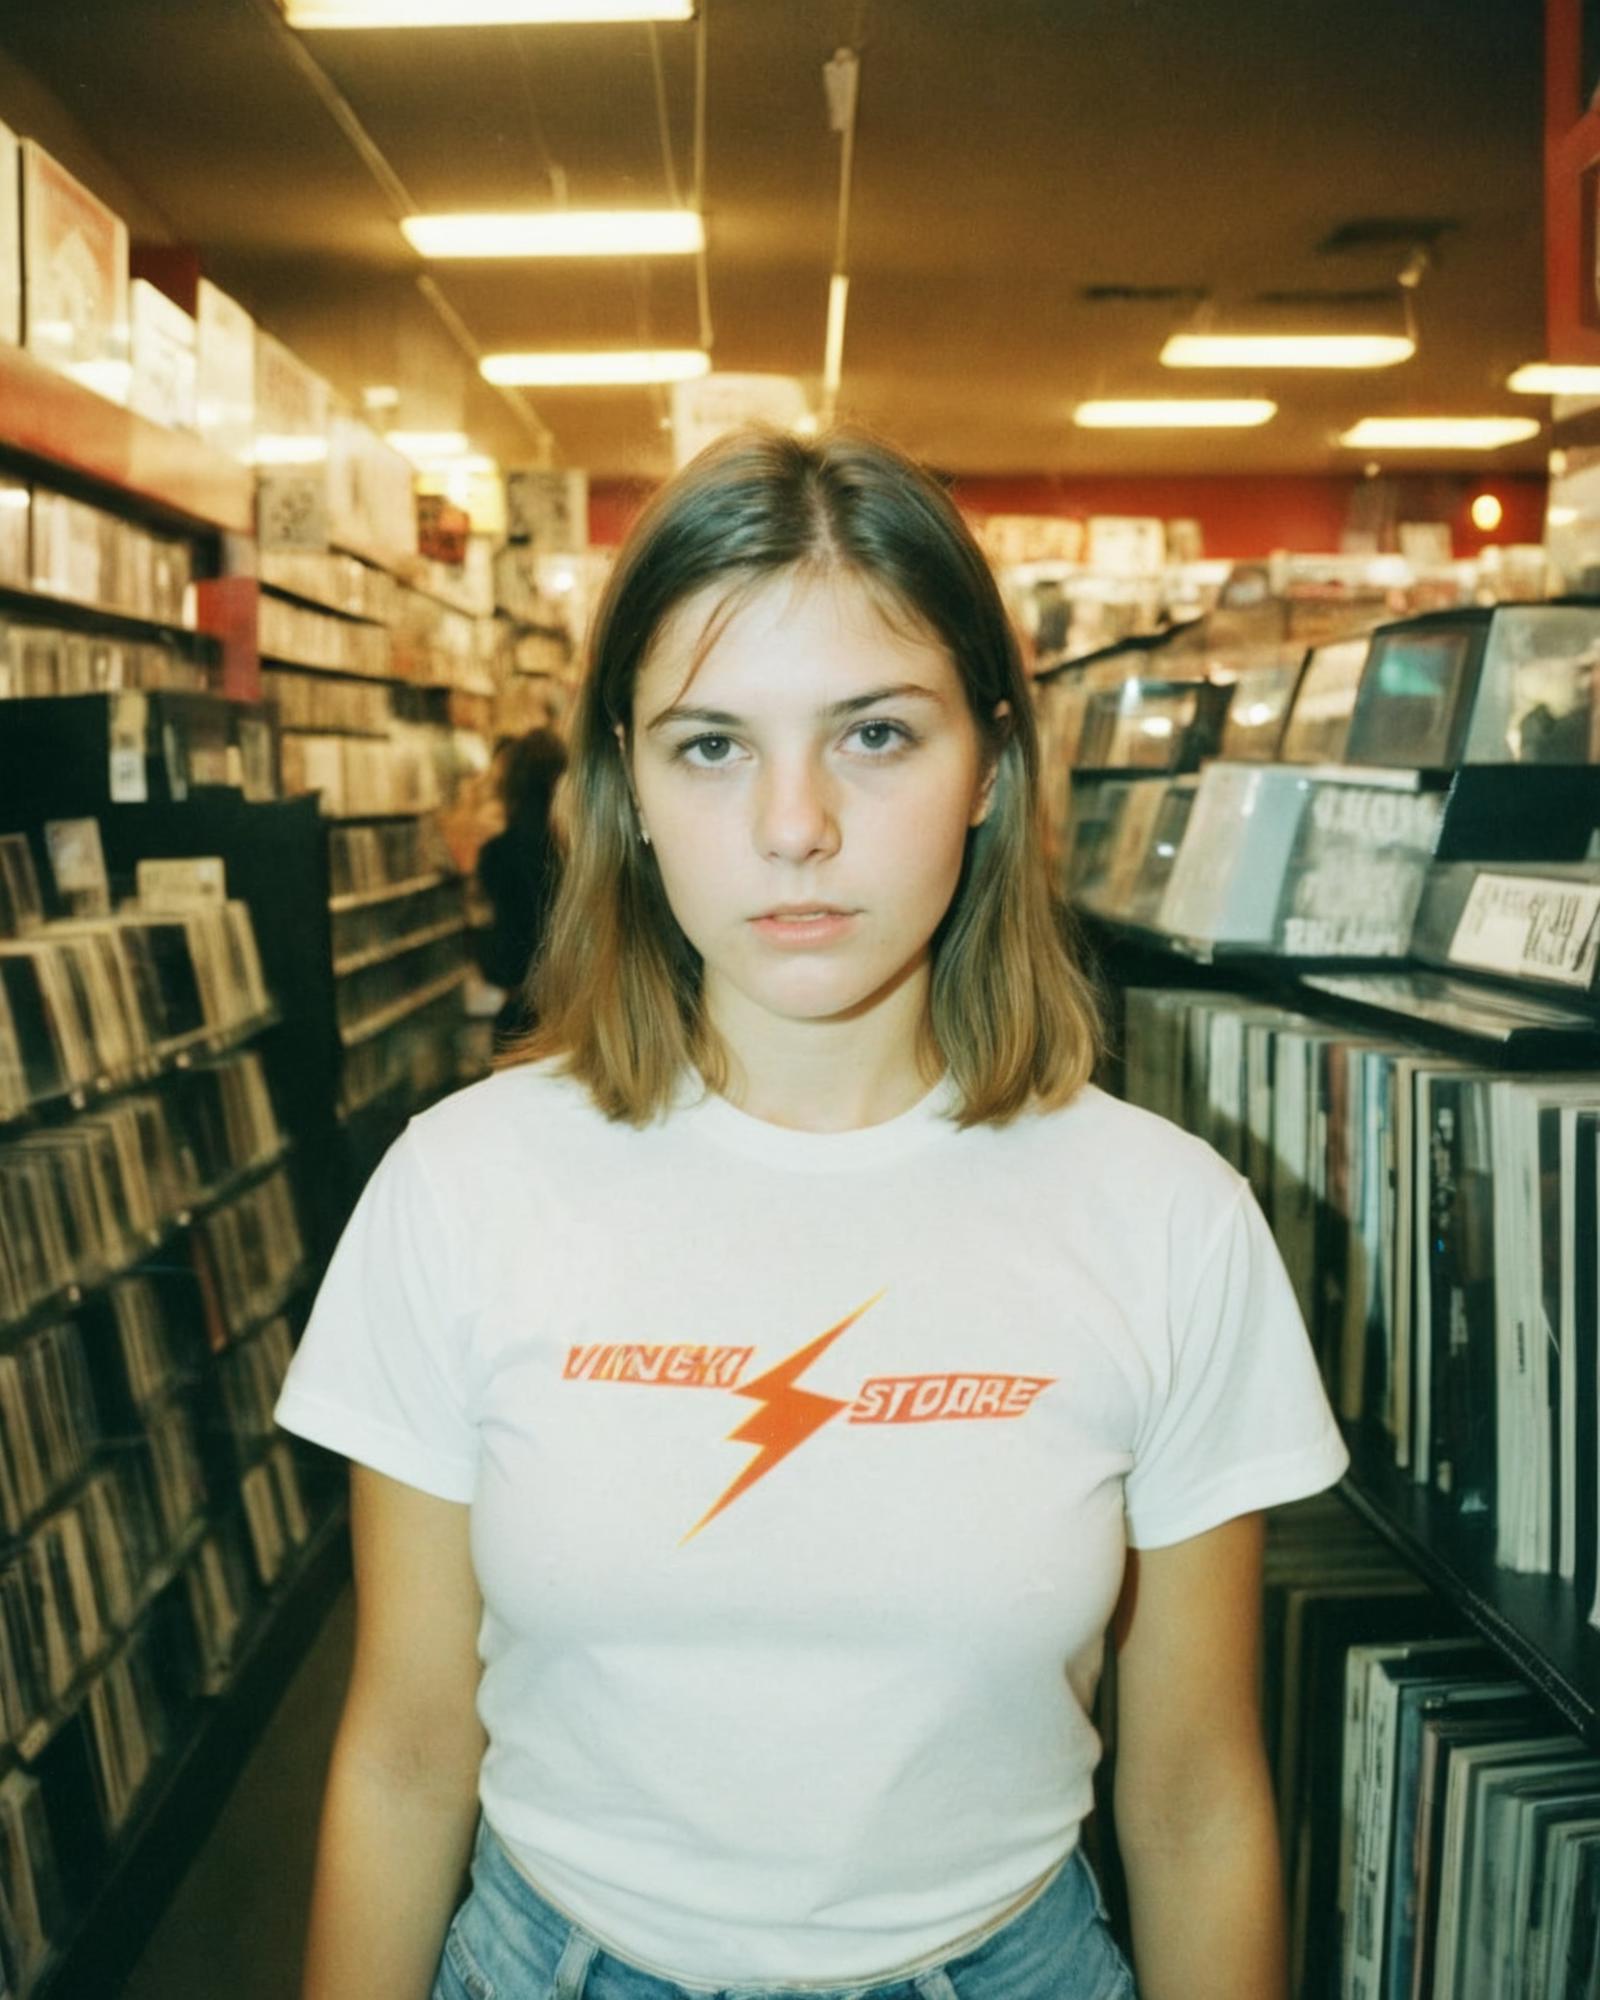 A woman wearing a white shirt with the word "Vinyl" on it stands in a store.